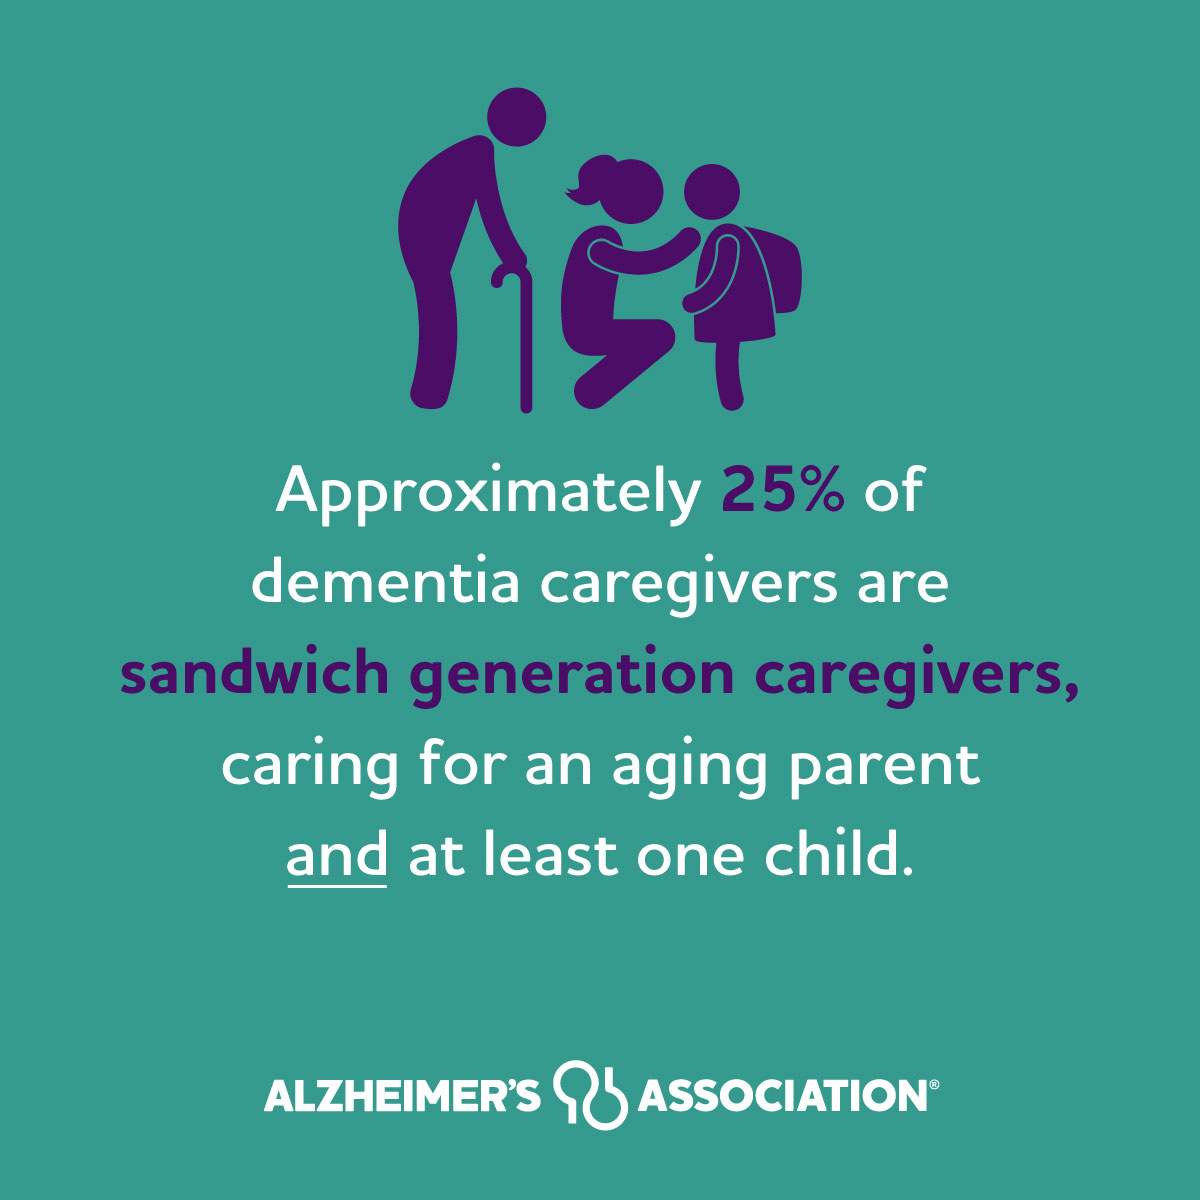 Caring for an aging parent with dementia is challenging enough. Approximately 25% of dementia caregivers do so while also caring for at least one child. Share the facts and join the fight at alz.org/facts. #ENDALZ